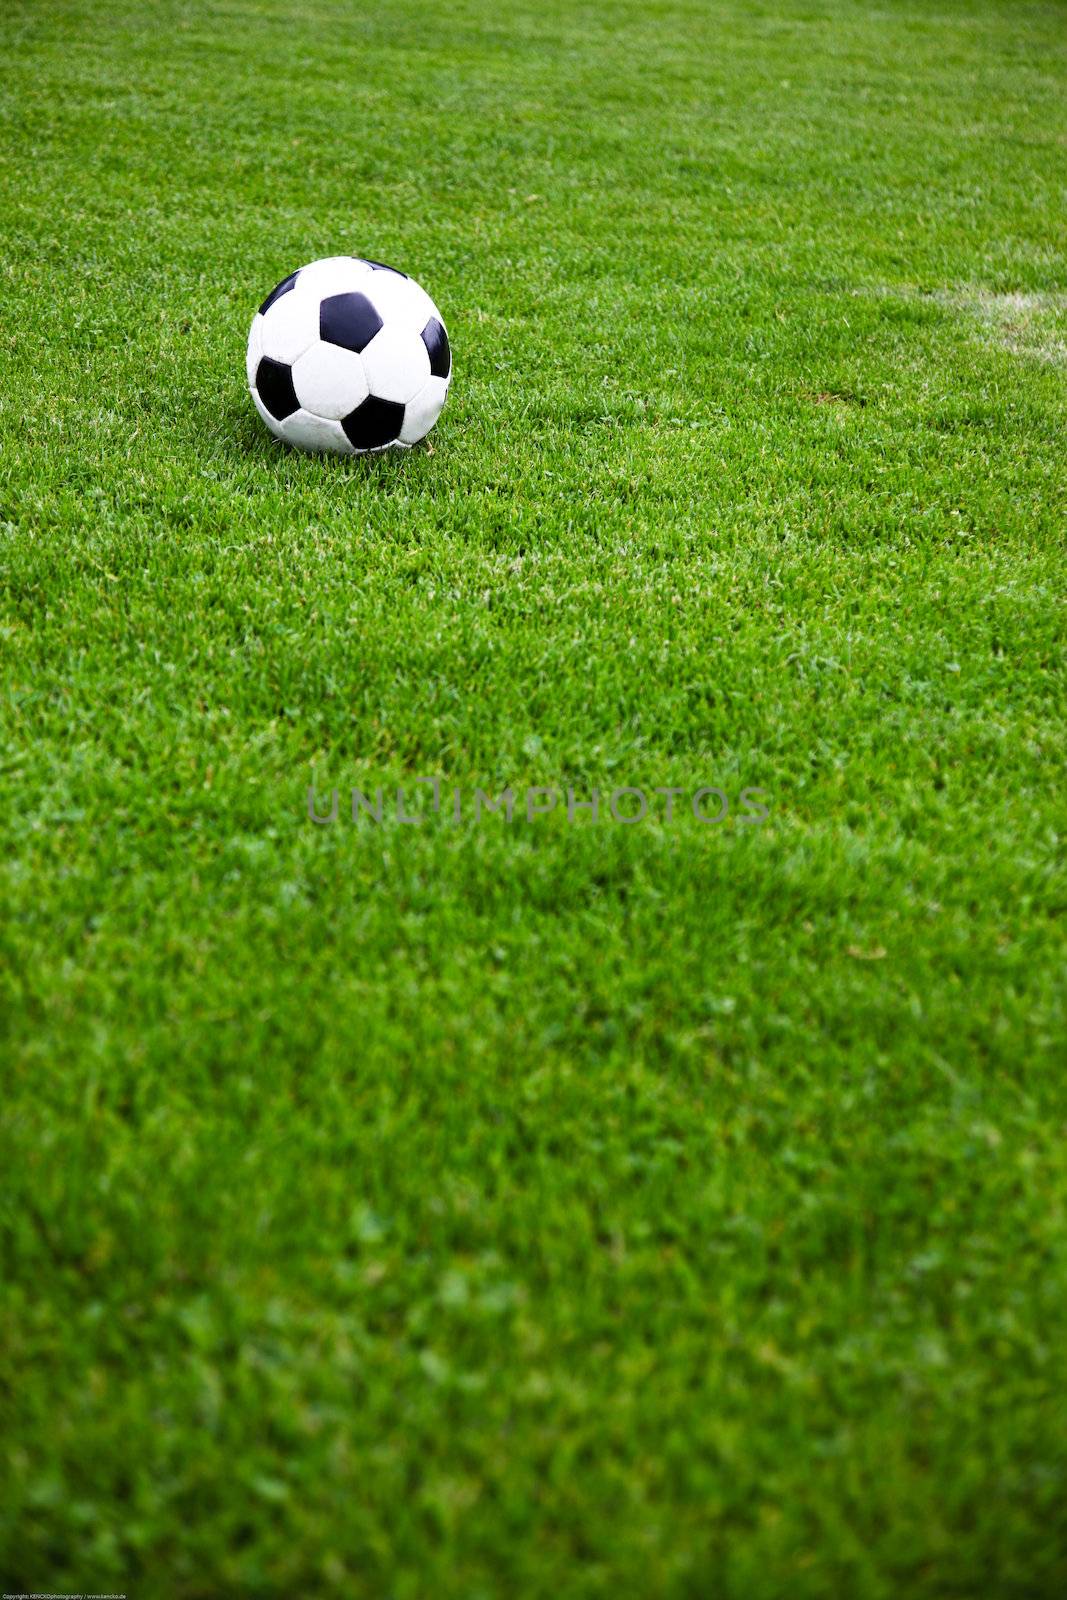 Photo Of A Soccer Ball On A Grassy Field